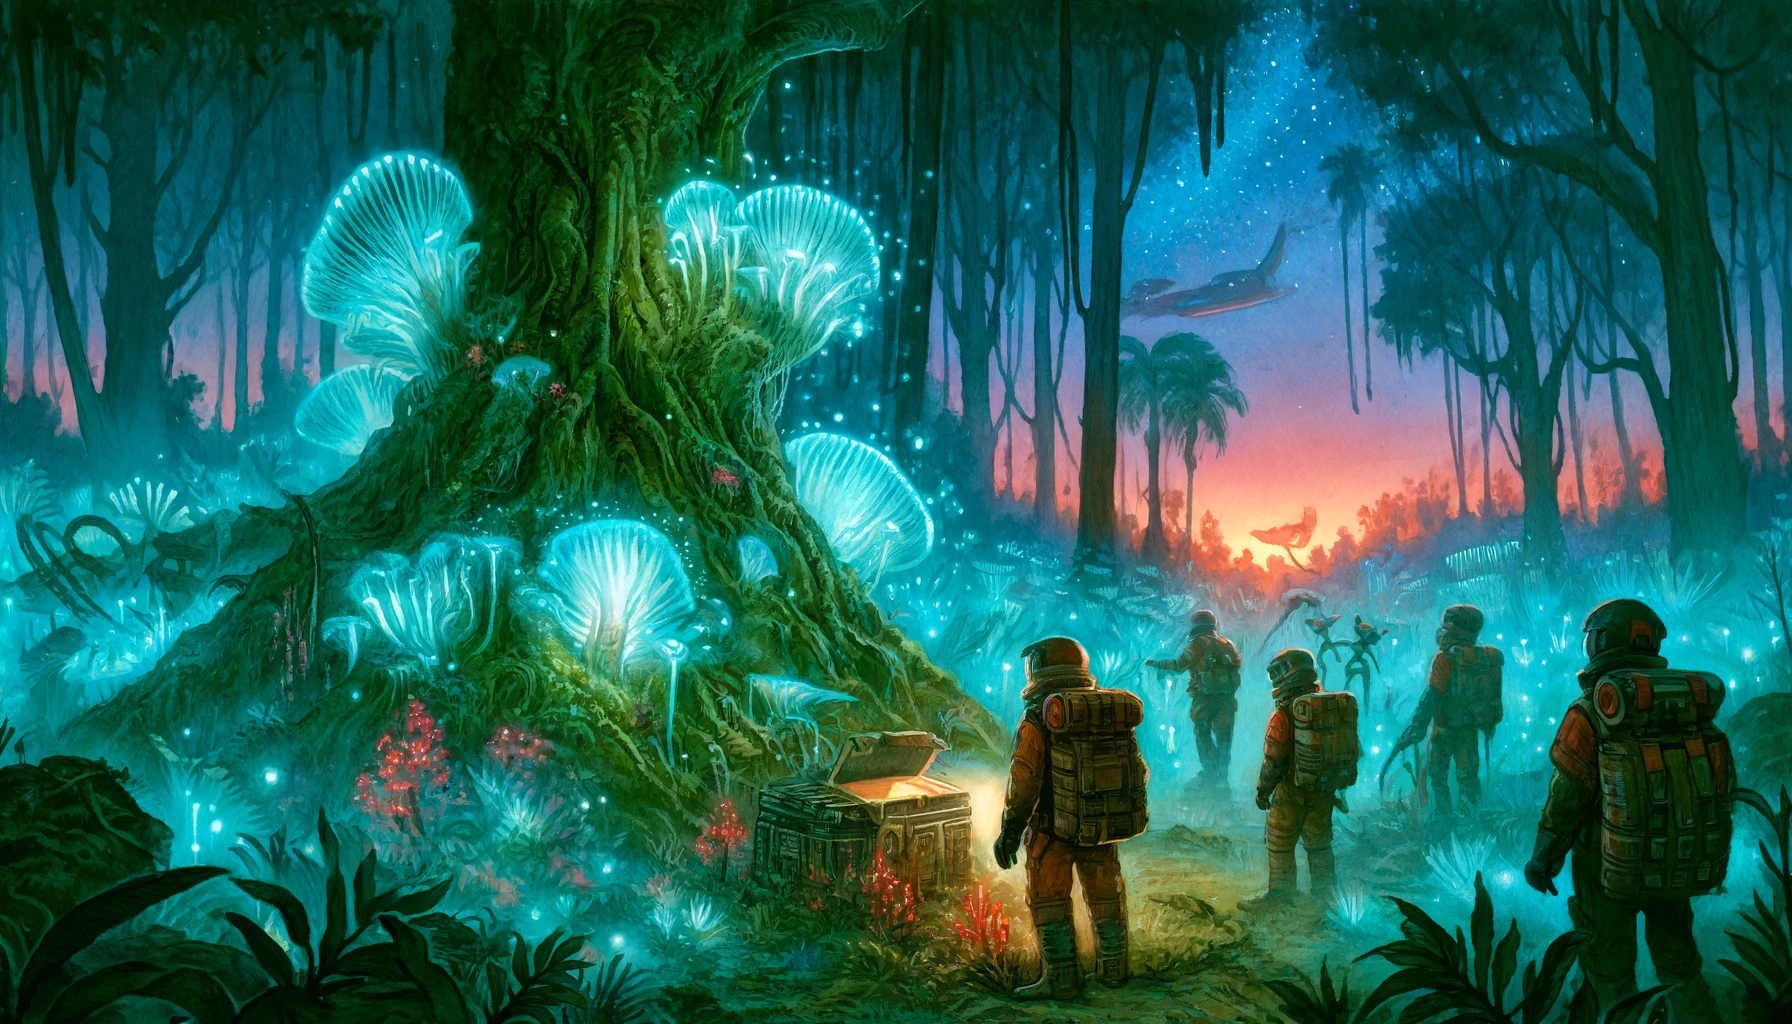 The scene features adventurers cautiously making their way through an alien jungle illuminated by bioluminescent flora. One character examines an ancient alien artifact partially buried in the ground. The background includes towering trees and a vibrant, otherworldly sky.